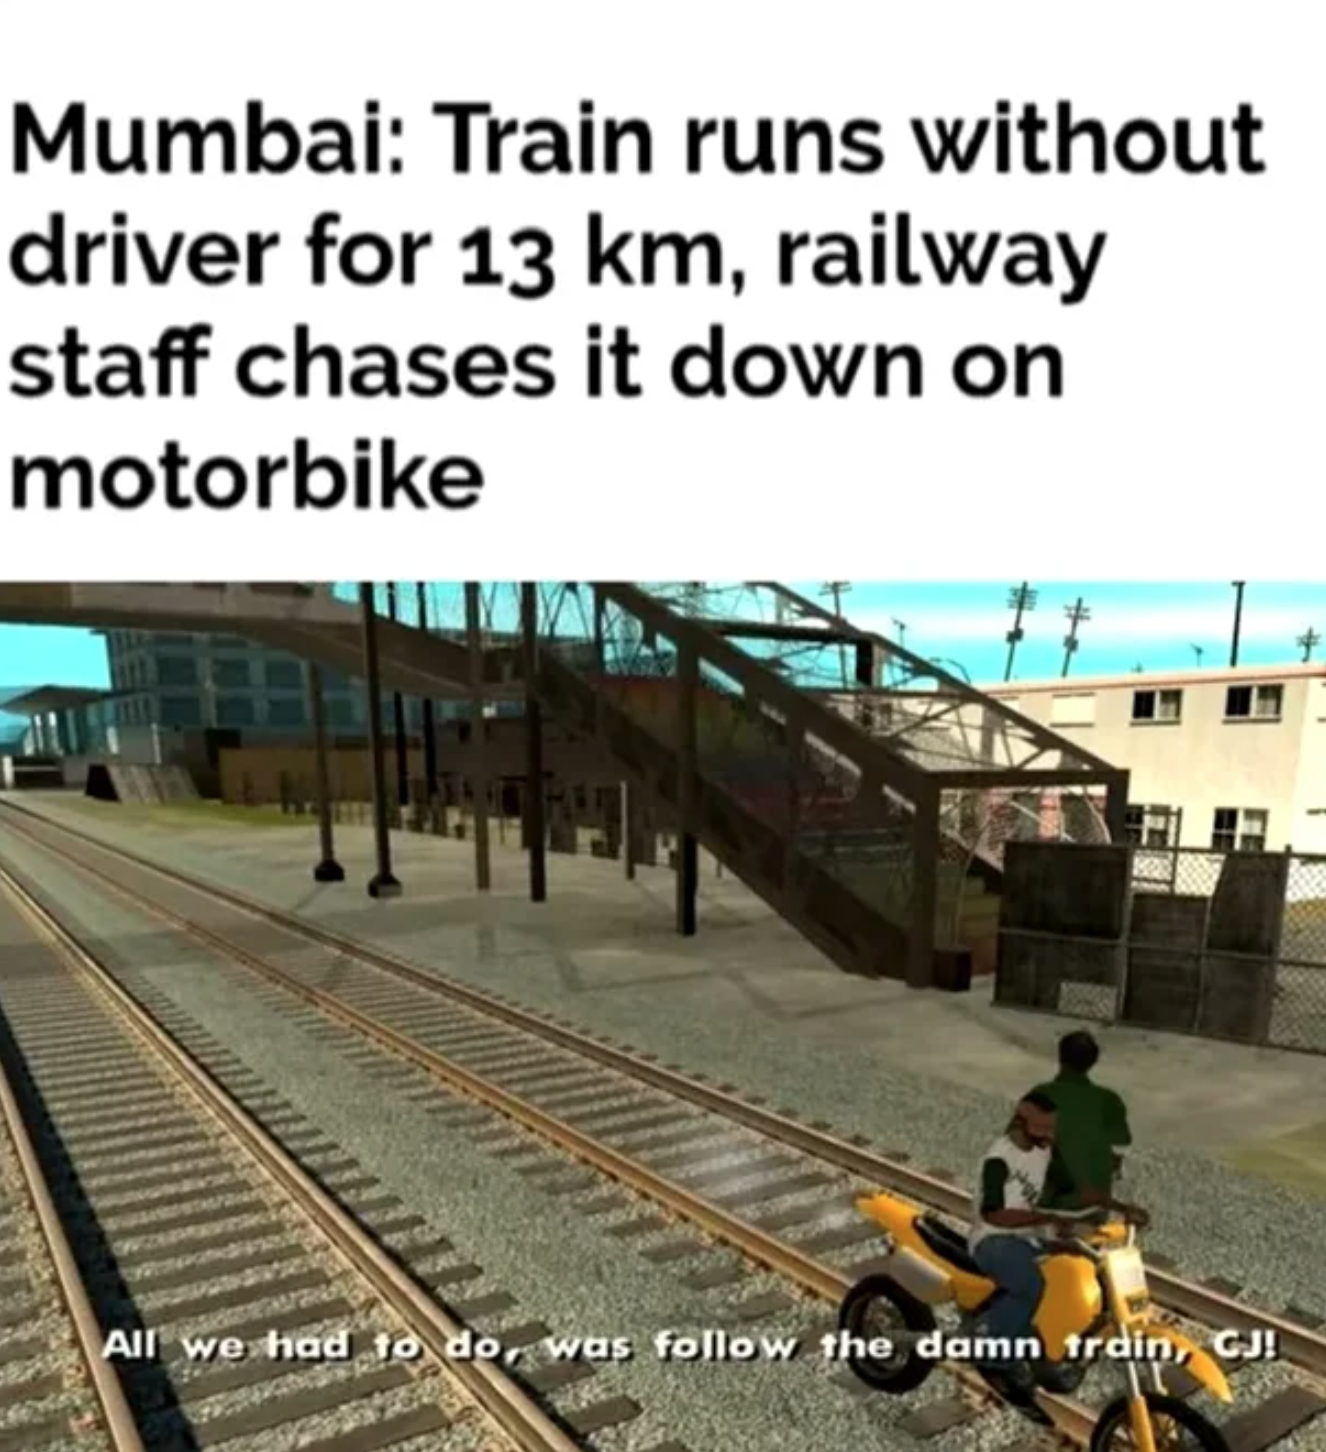 gaming memes - all we had to do was follow - Mumbai Train runs without driver for 13 km, railway staff chases it down on motorbike All we had to do, was the damn train, Cj!